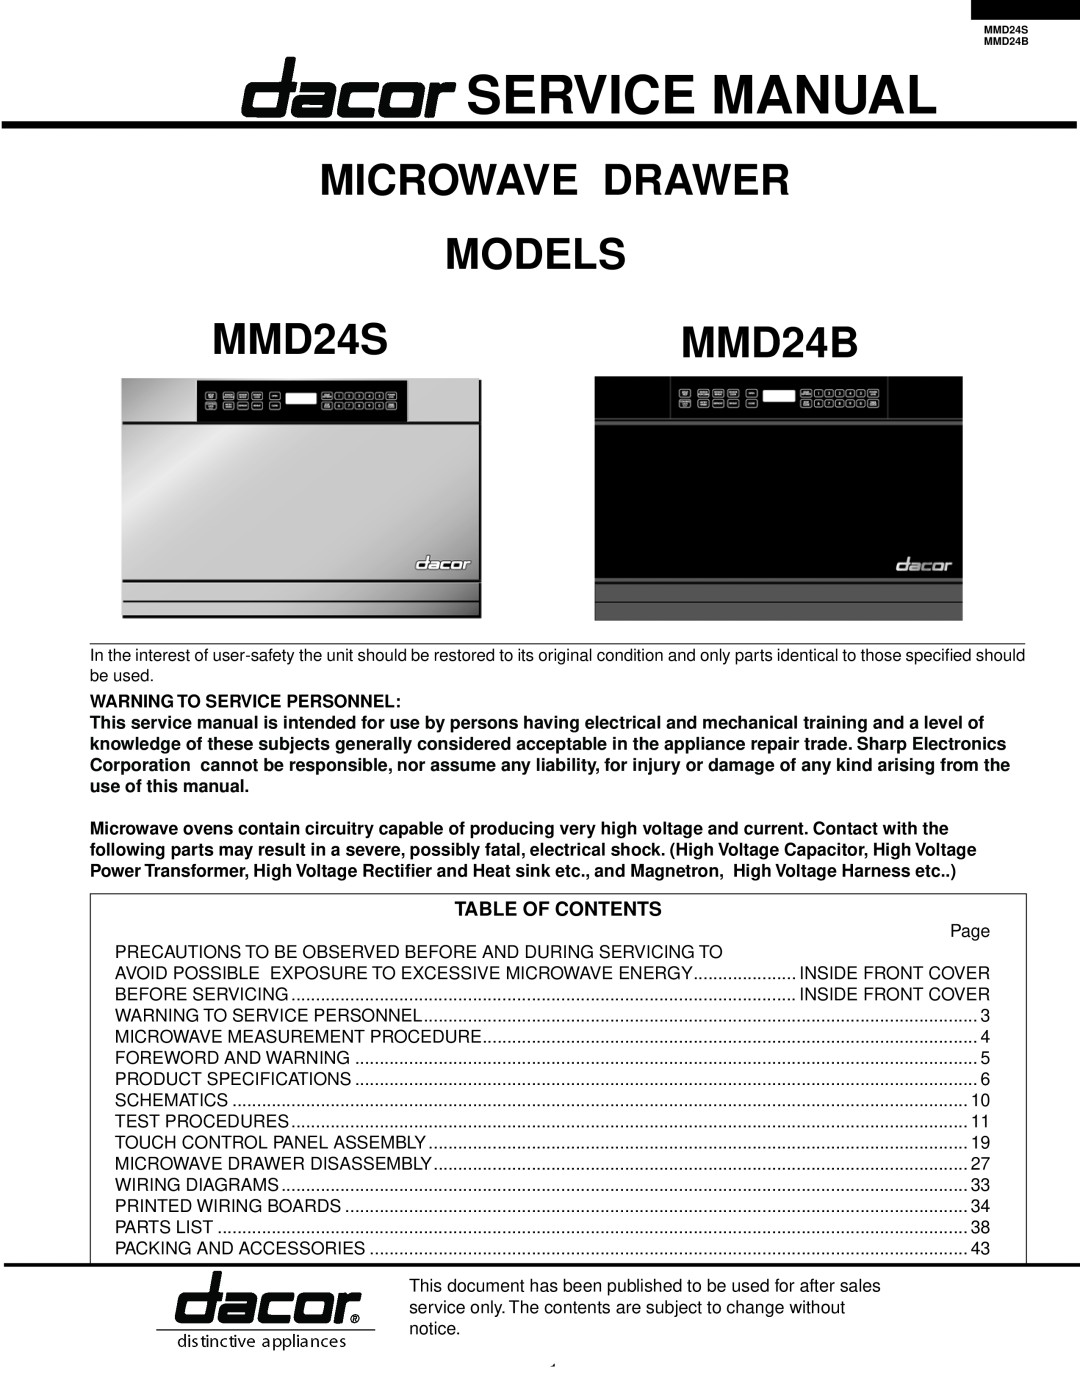 Sharp manual Table Of Contents, MICROWAVE DRAWER MODELS MMD24SMMD24B, S38M289MMD24S, Warning To Service Personnel 